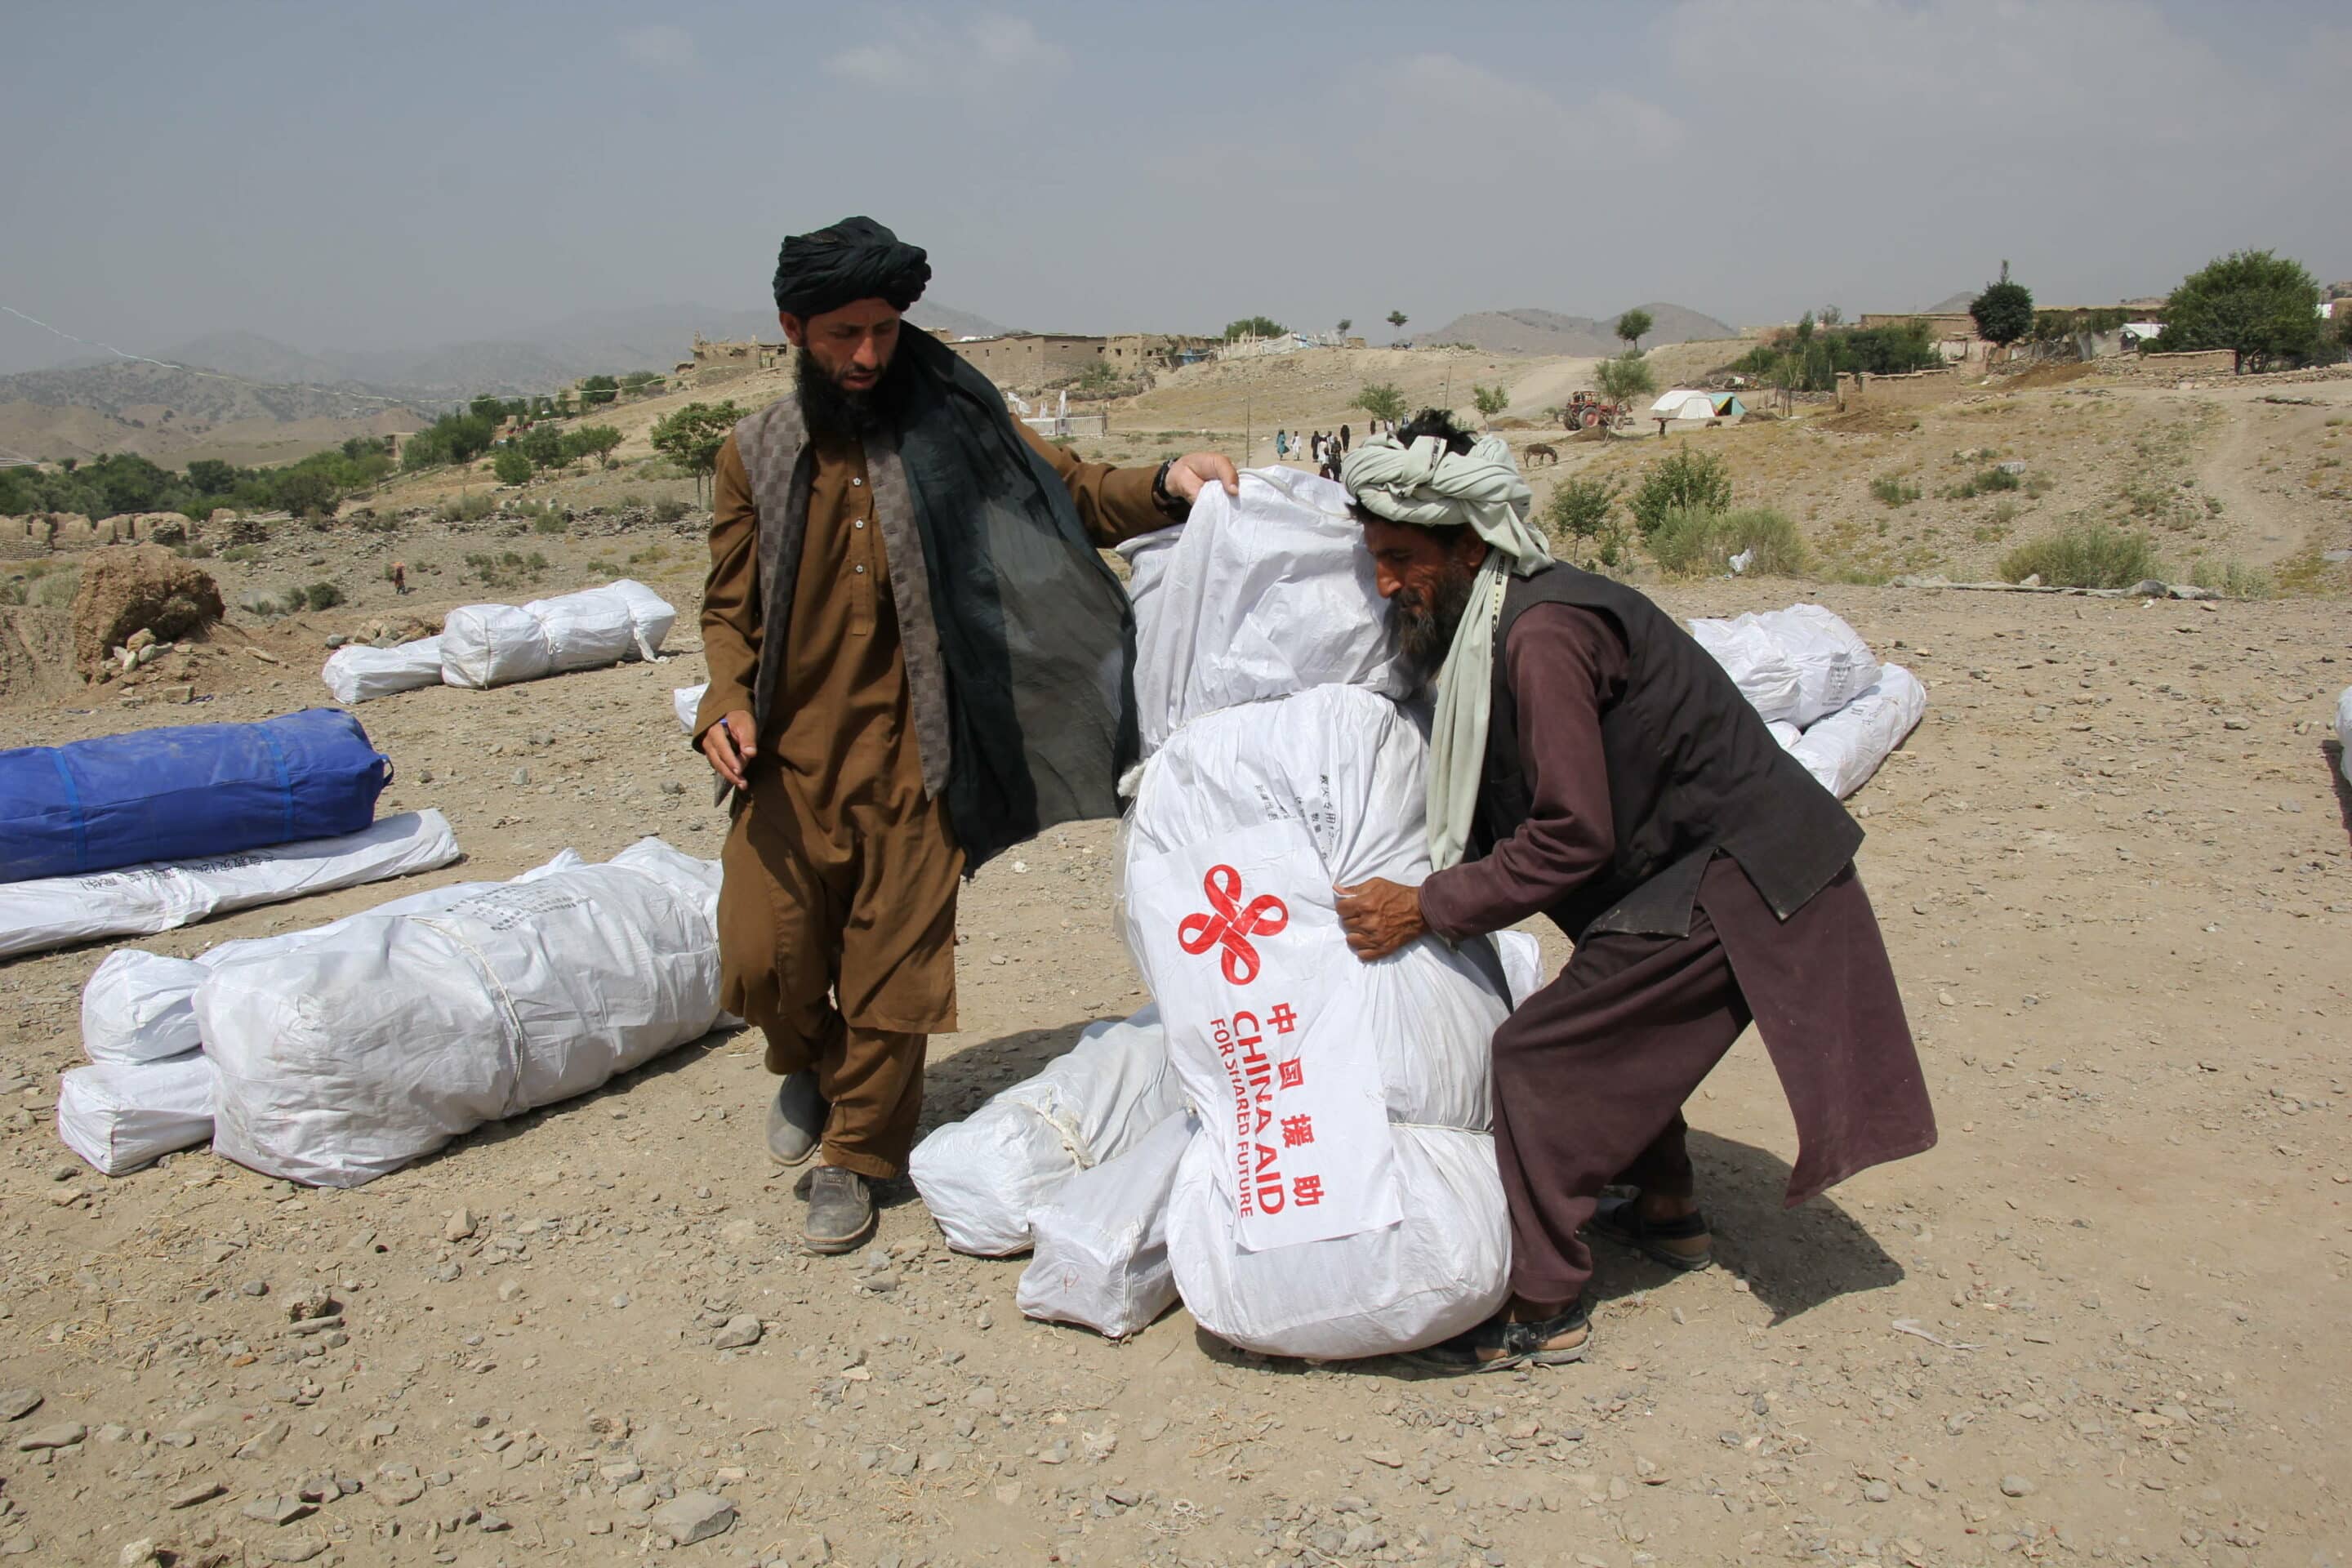 Afghan men carrying China-donated quake relief supplies in Paktika province, Afghanistan. -//CHINENOUVELLE_XxjpbeE007587_20220702_PEPFN0A001/2207021742/Credit:CHINE NOUVELLE/SIPA/2207021747